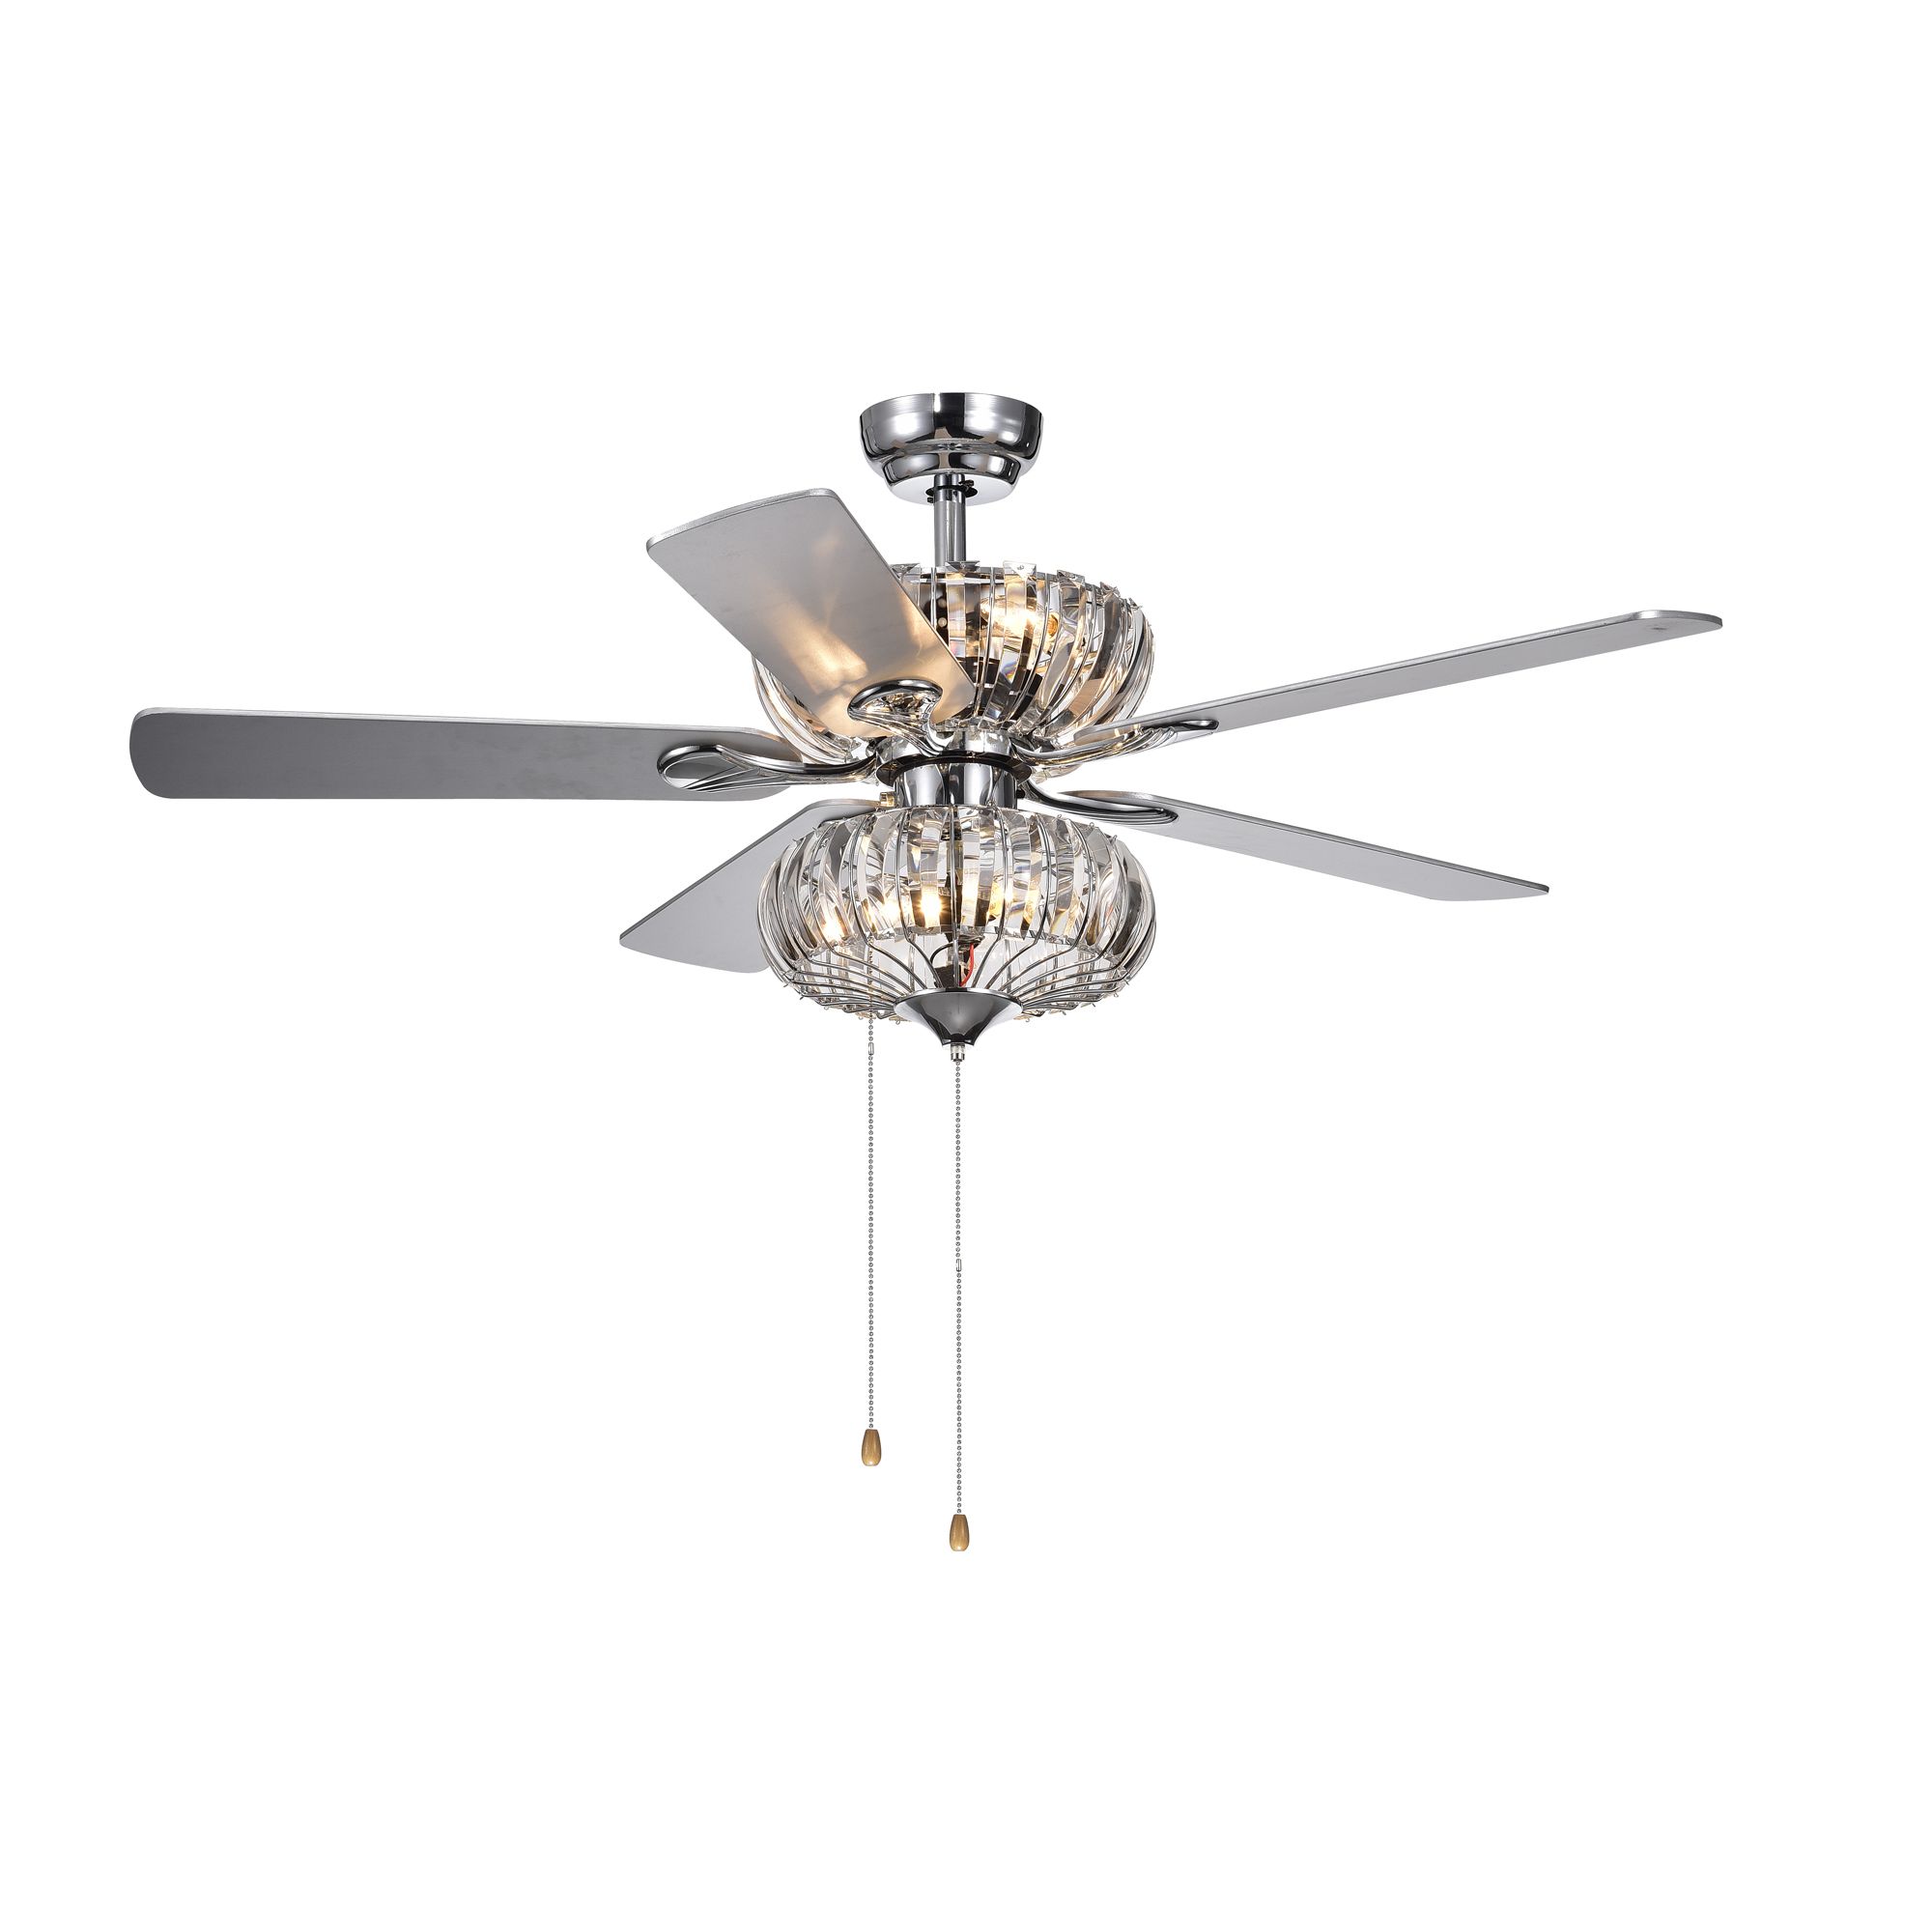 Newest Kyana 6 Light Crystal 5 Blade 52 Inch Chrome Ceiling Fan Regarding Jules 6 Blade Ceiling Fans (View 5 of 20)